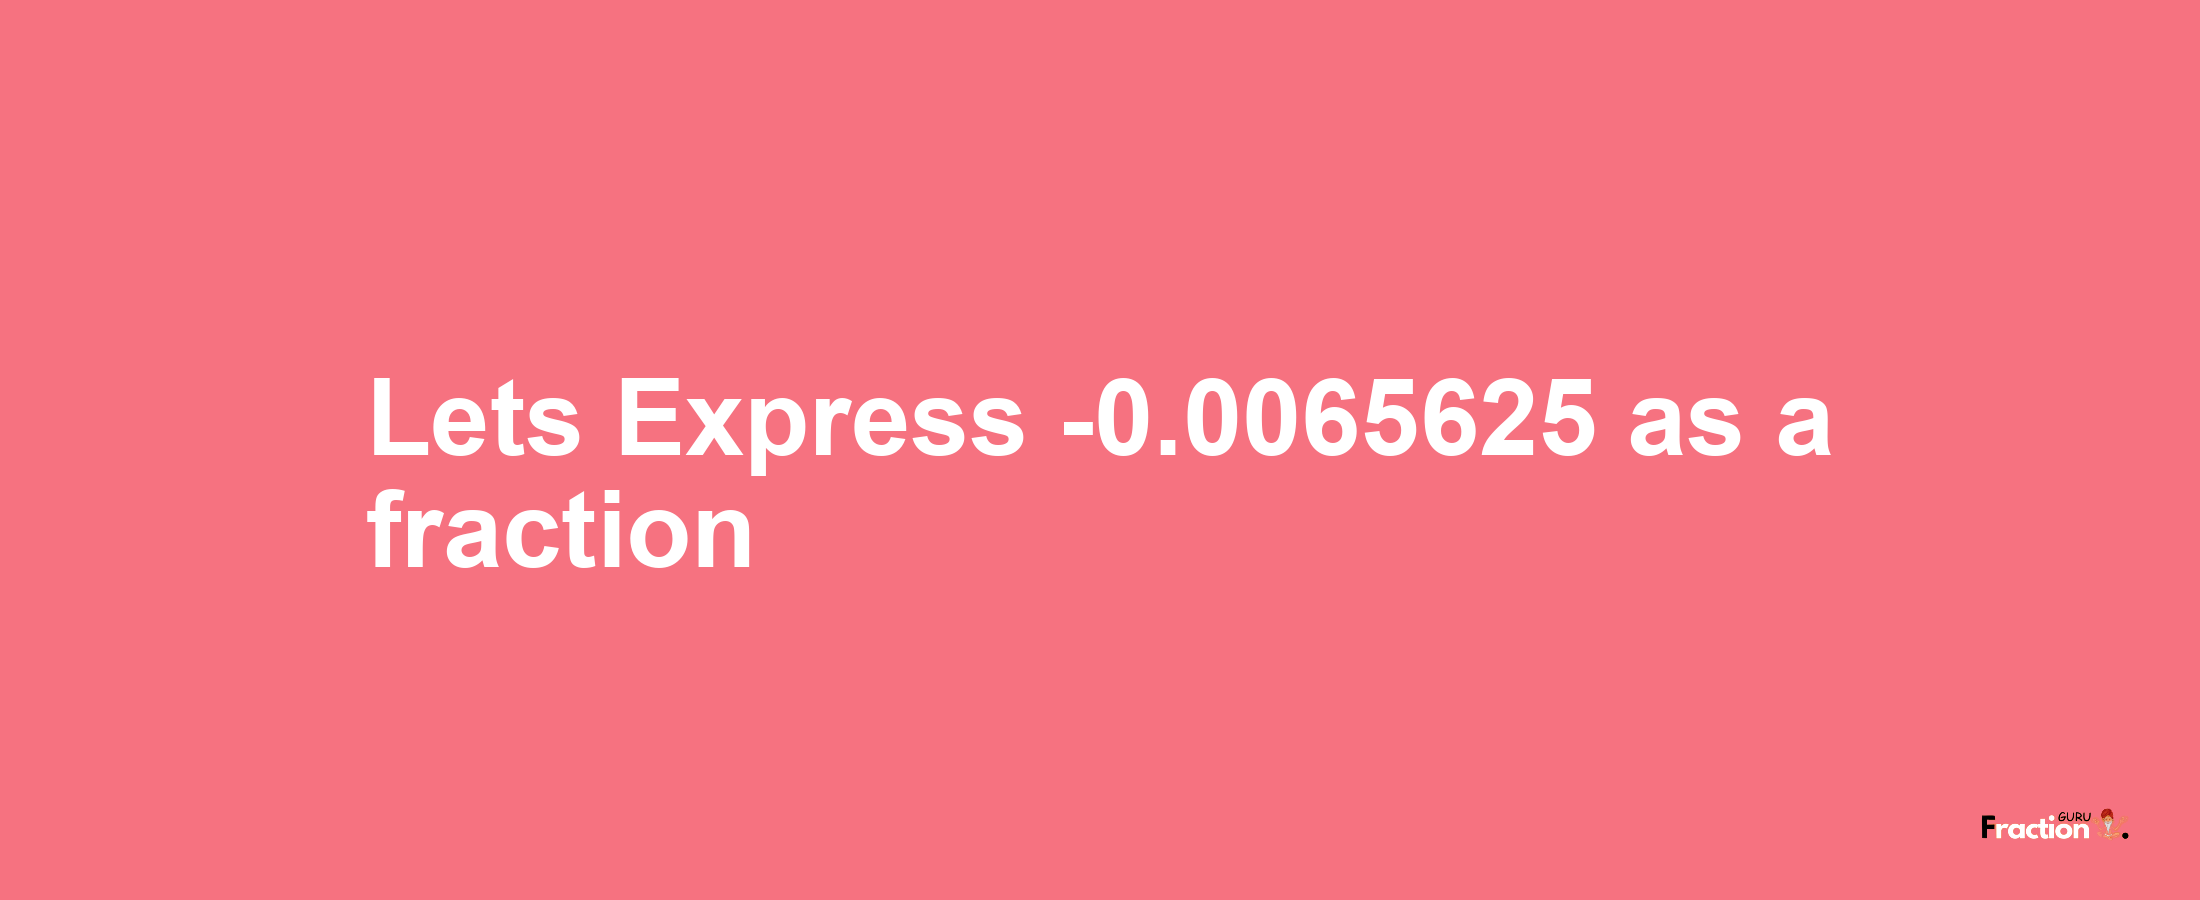 Lets Express -0.0065625 as afraction